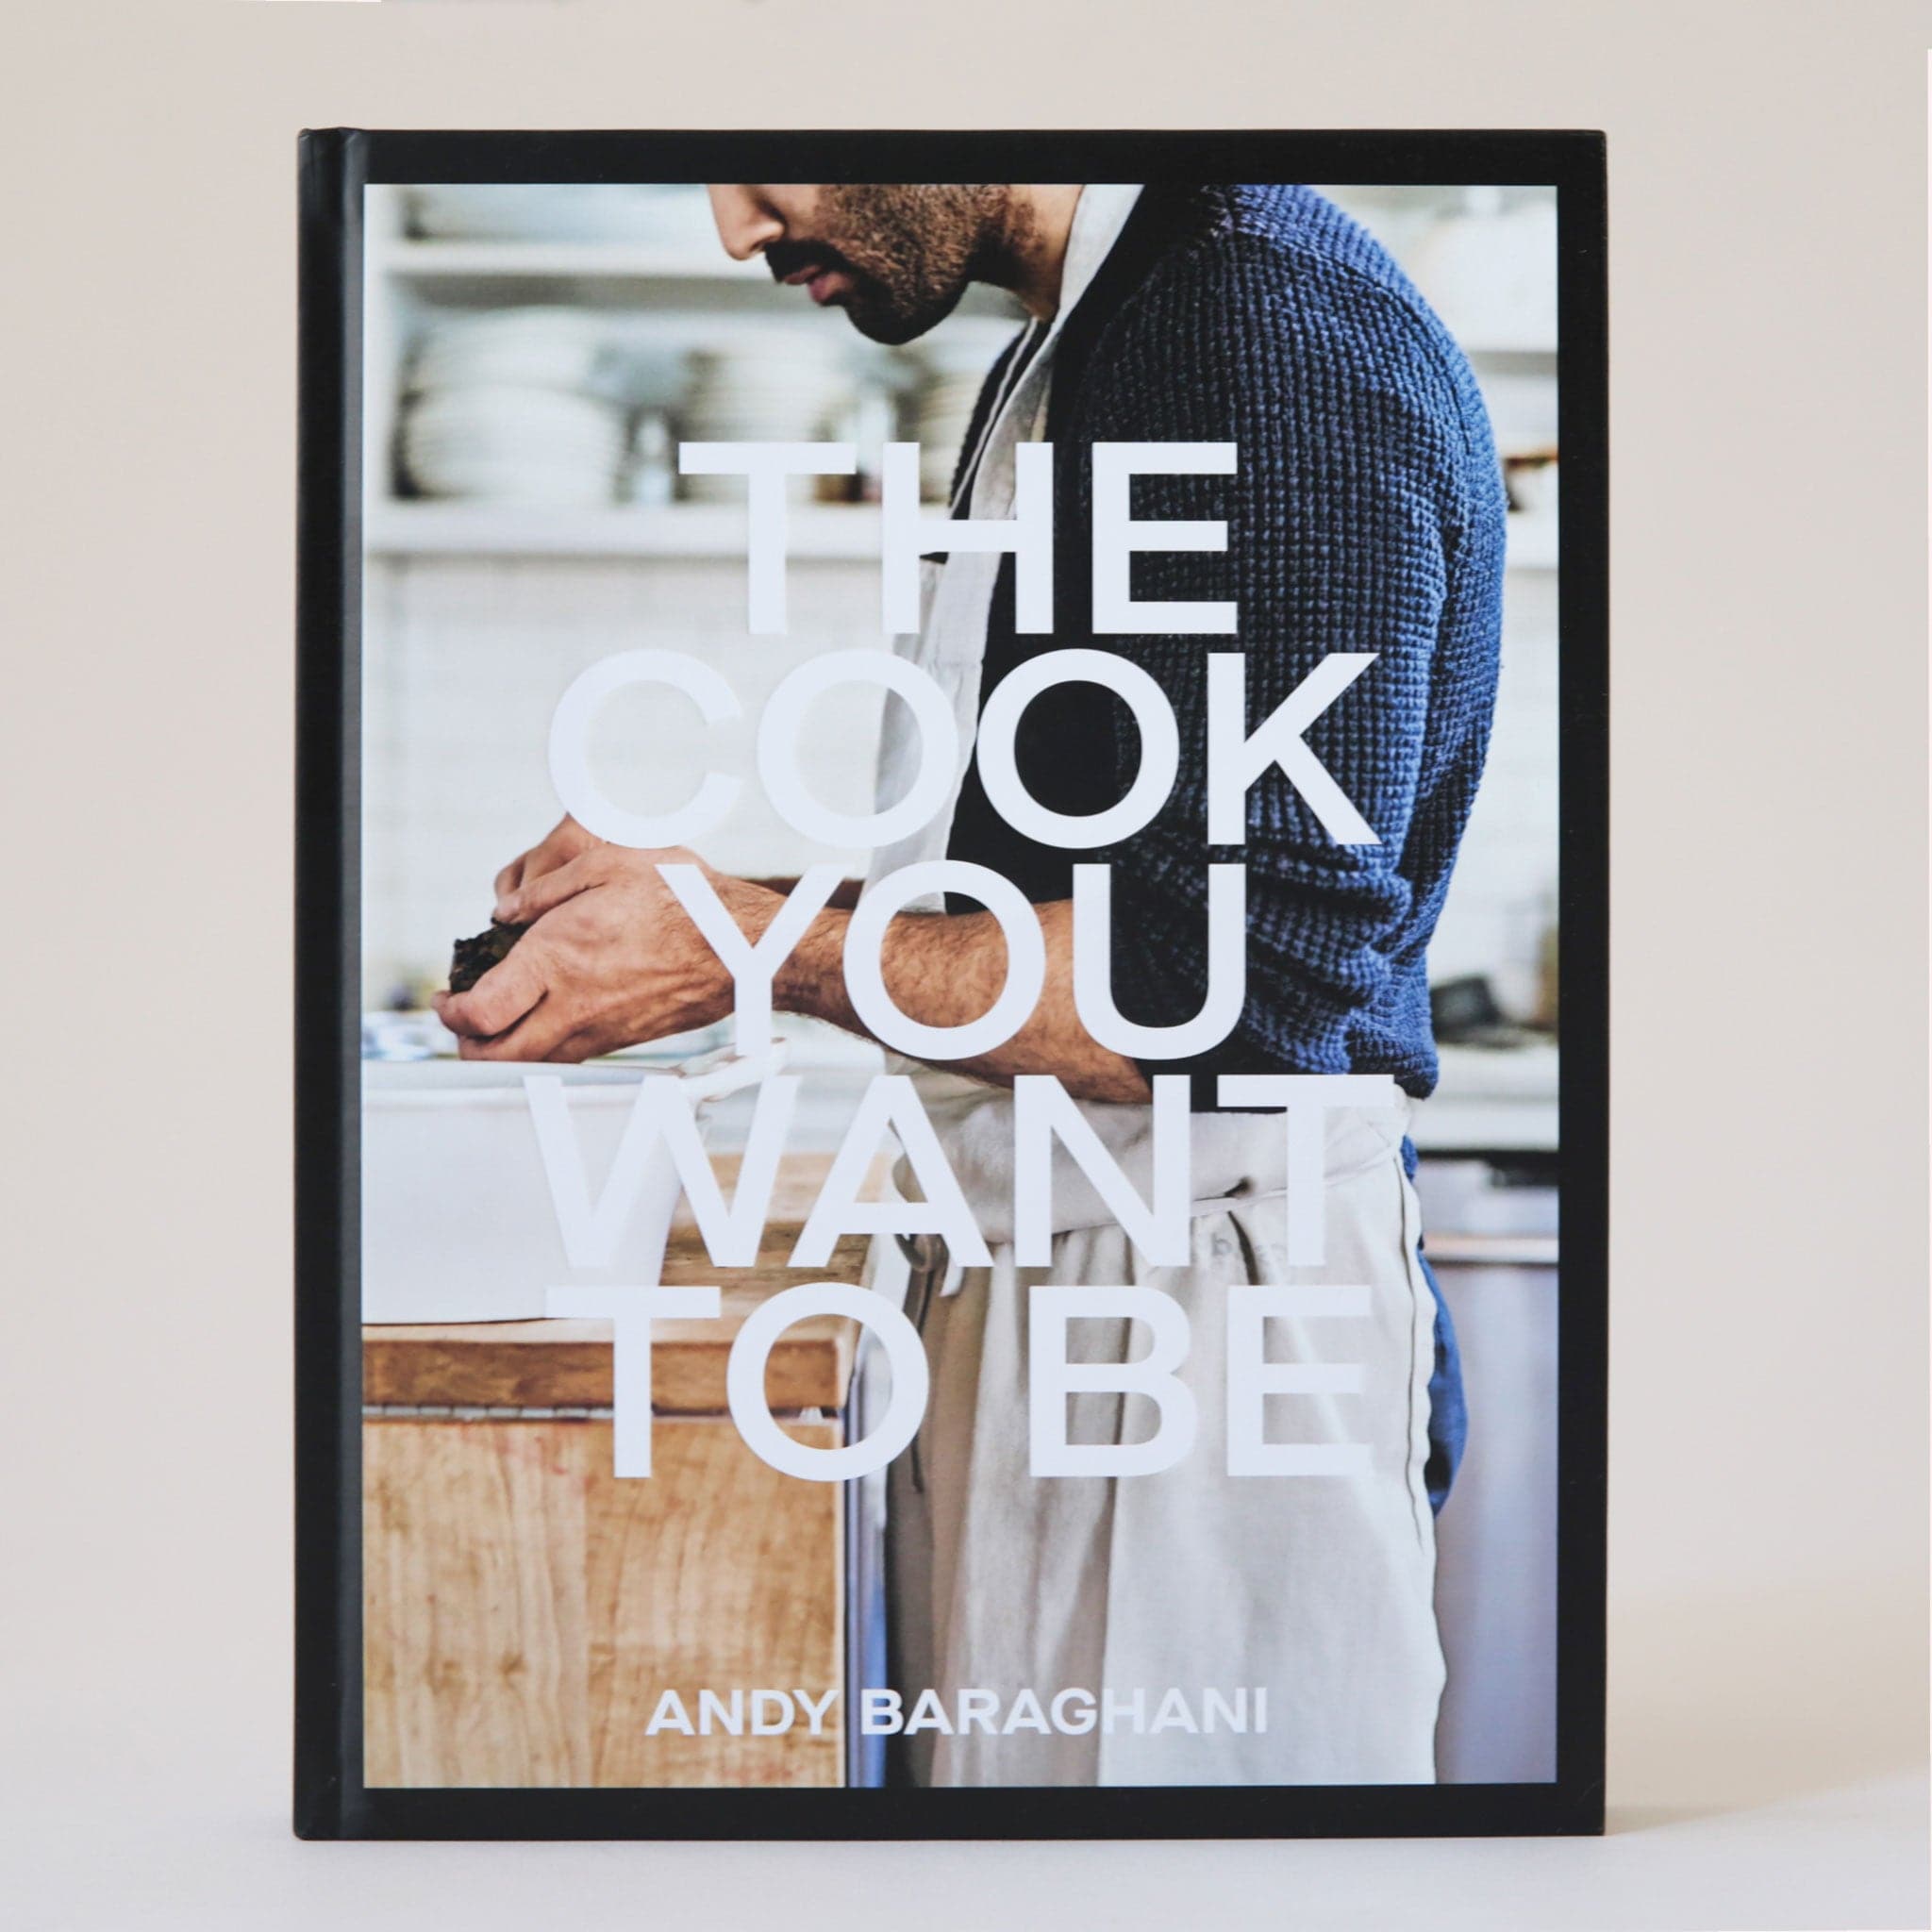 A sleek and stunning cookbook with the title, &quot;The Cook You Want To Be&quot; in white, bold text in front of a photo of a chef with an apron on, cooking.